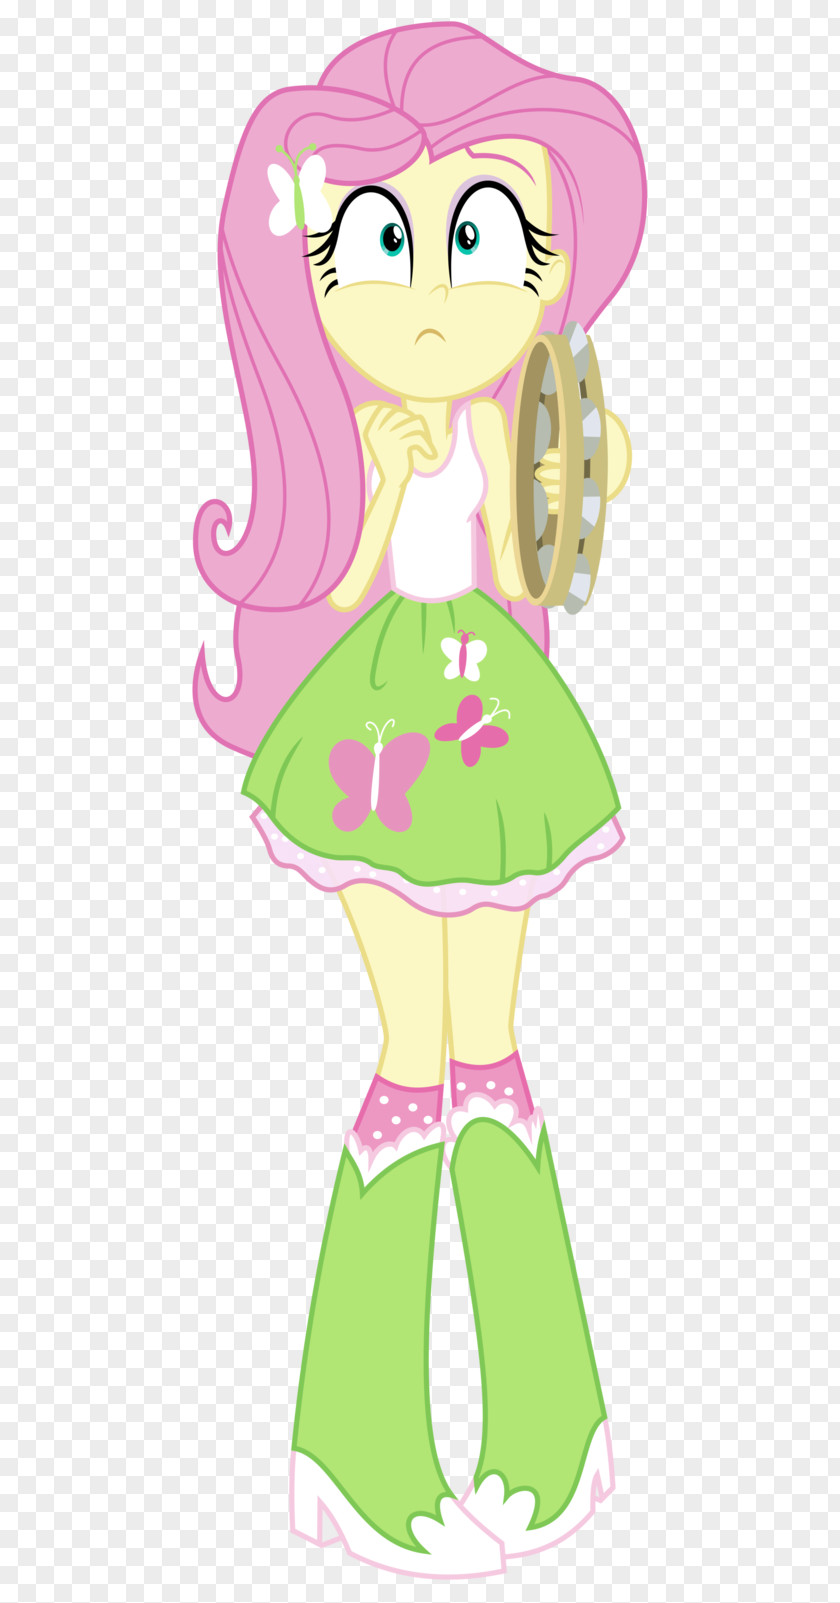 Fluttershy Crying Twilight Sparkle Applejack Pinkie Pie Rarity PNG